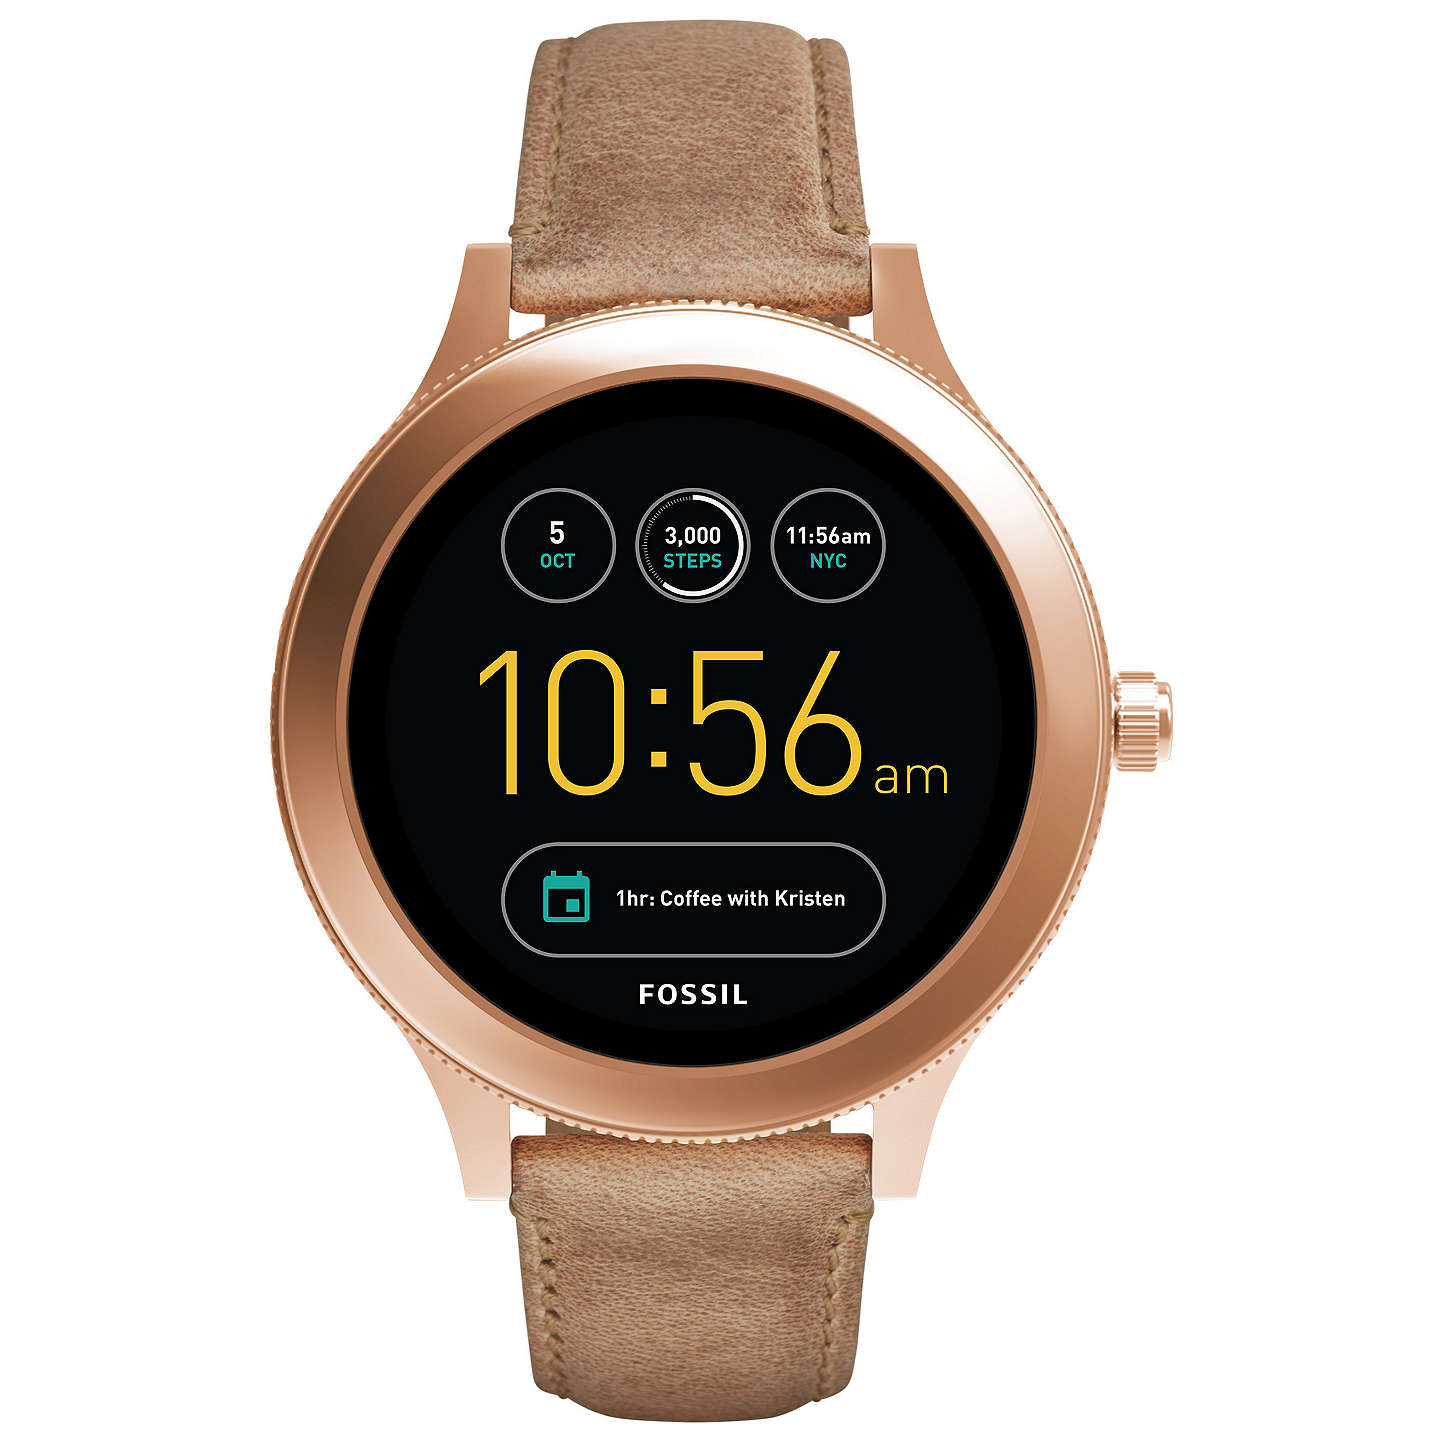 Smartwatch john lewis fossil - Fossil gets active with